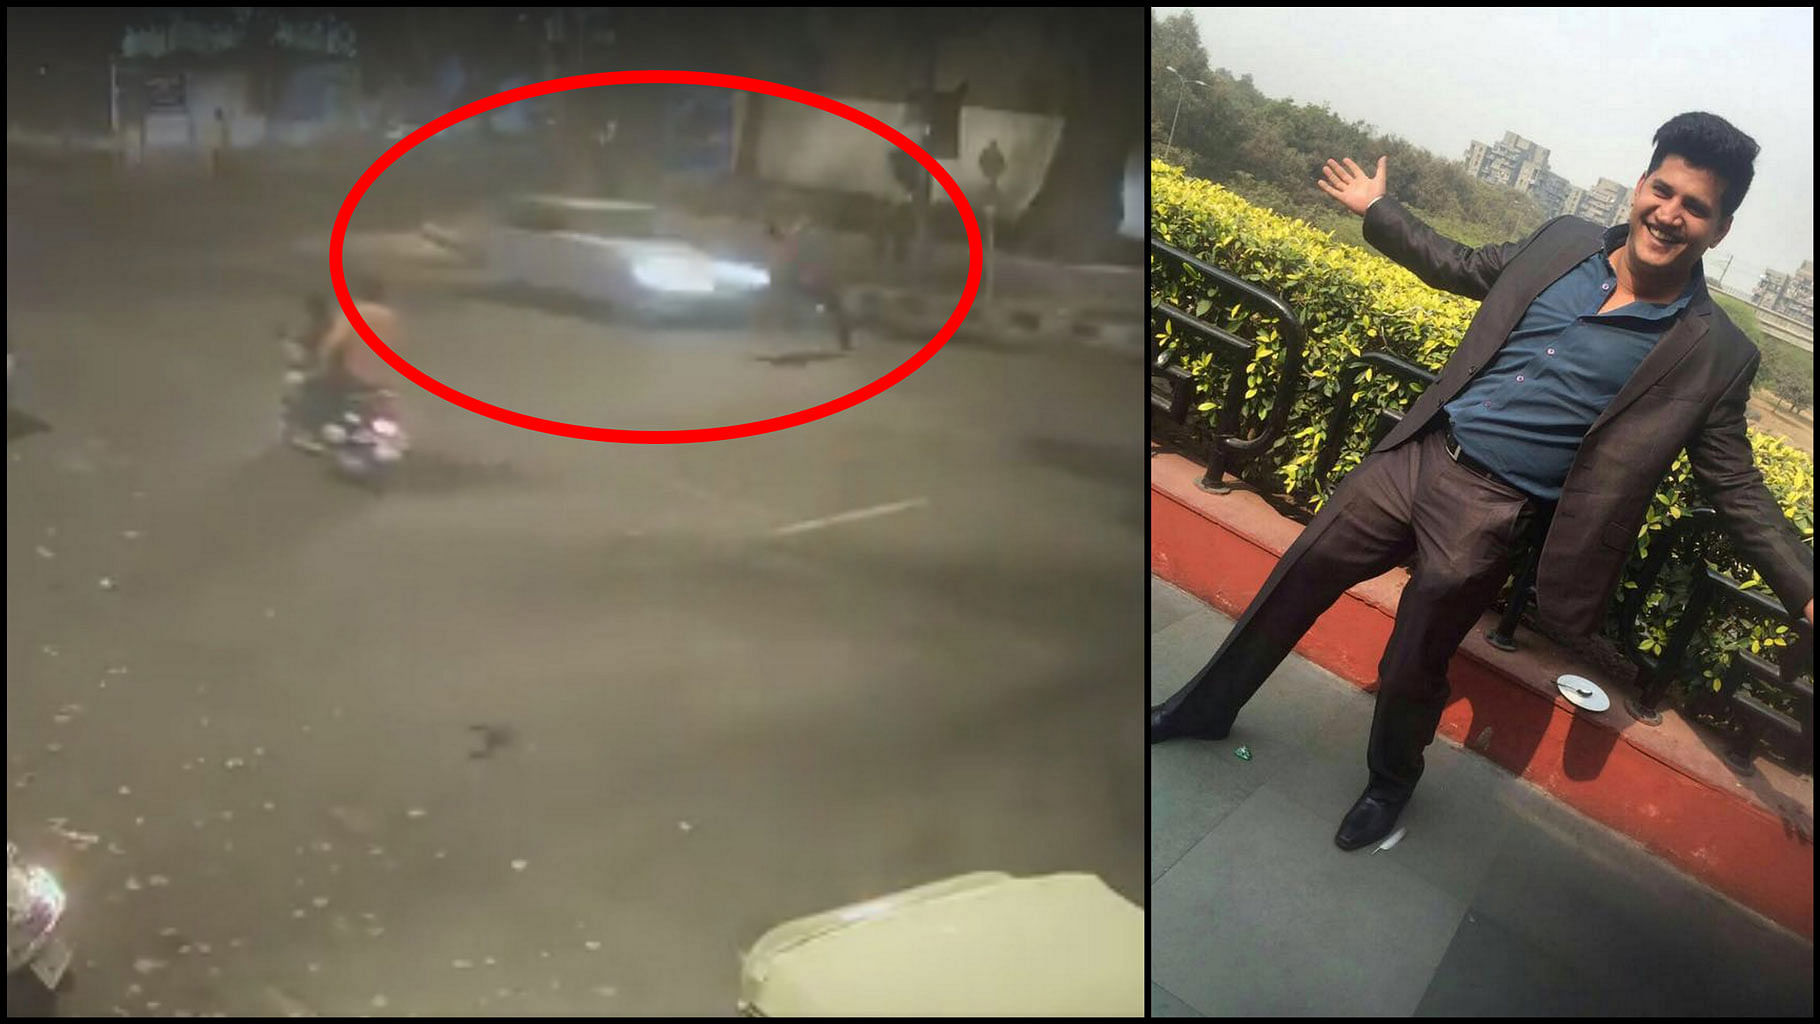 Sidharth Sharma, the 32-year-old marketing consultant who died in a hit-and-run case. (Photo Courtesy: Screengrab from CCTV footage)&nbsp;